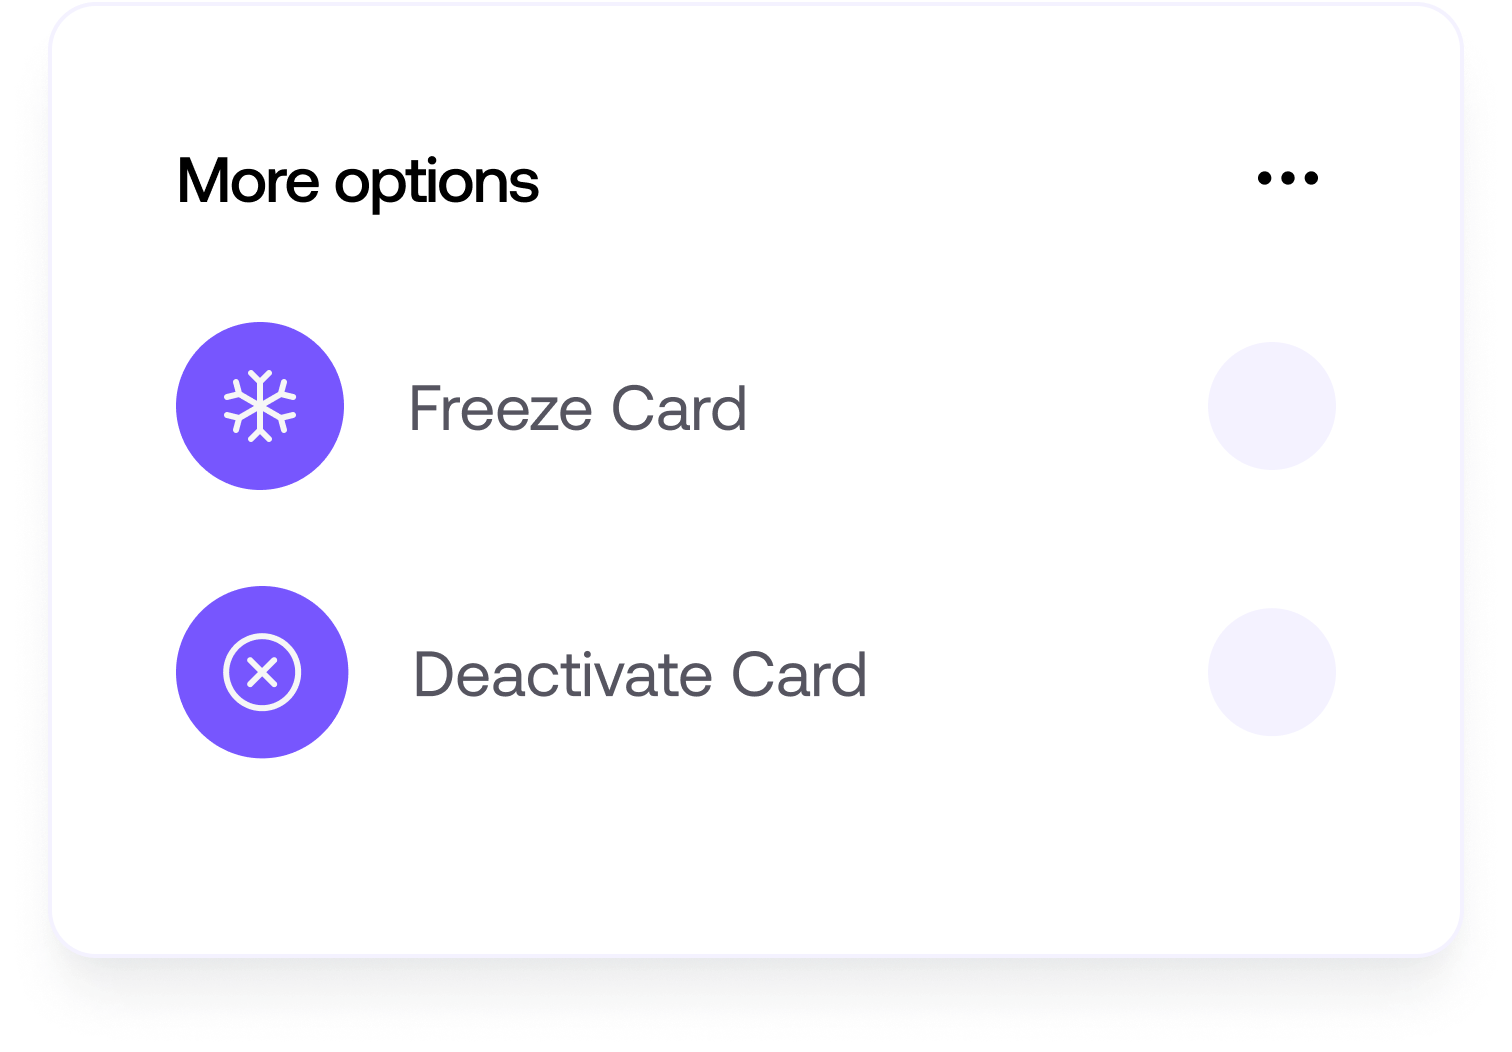 Our virtual card offers you the option to freeze your card after every transaction at no extra-fee.